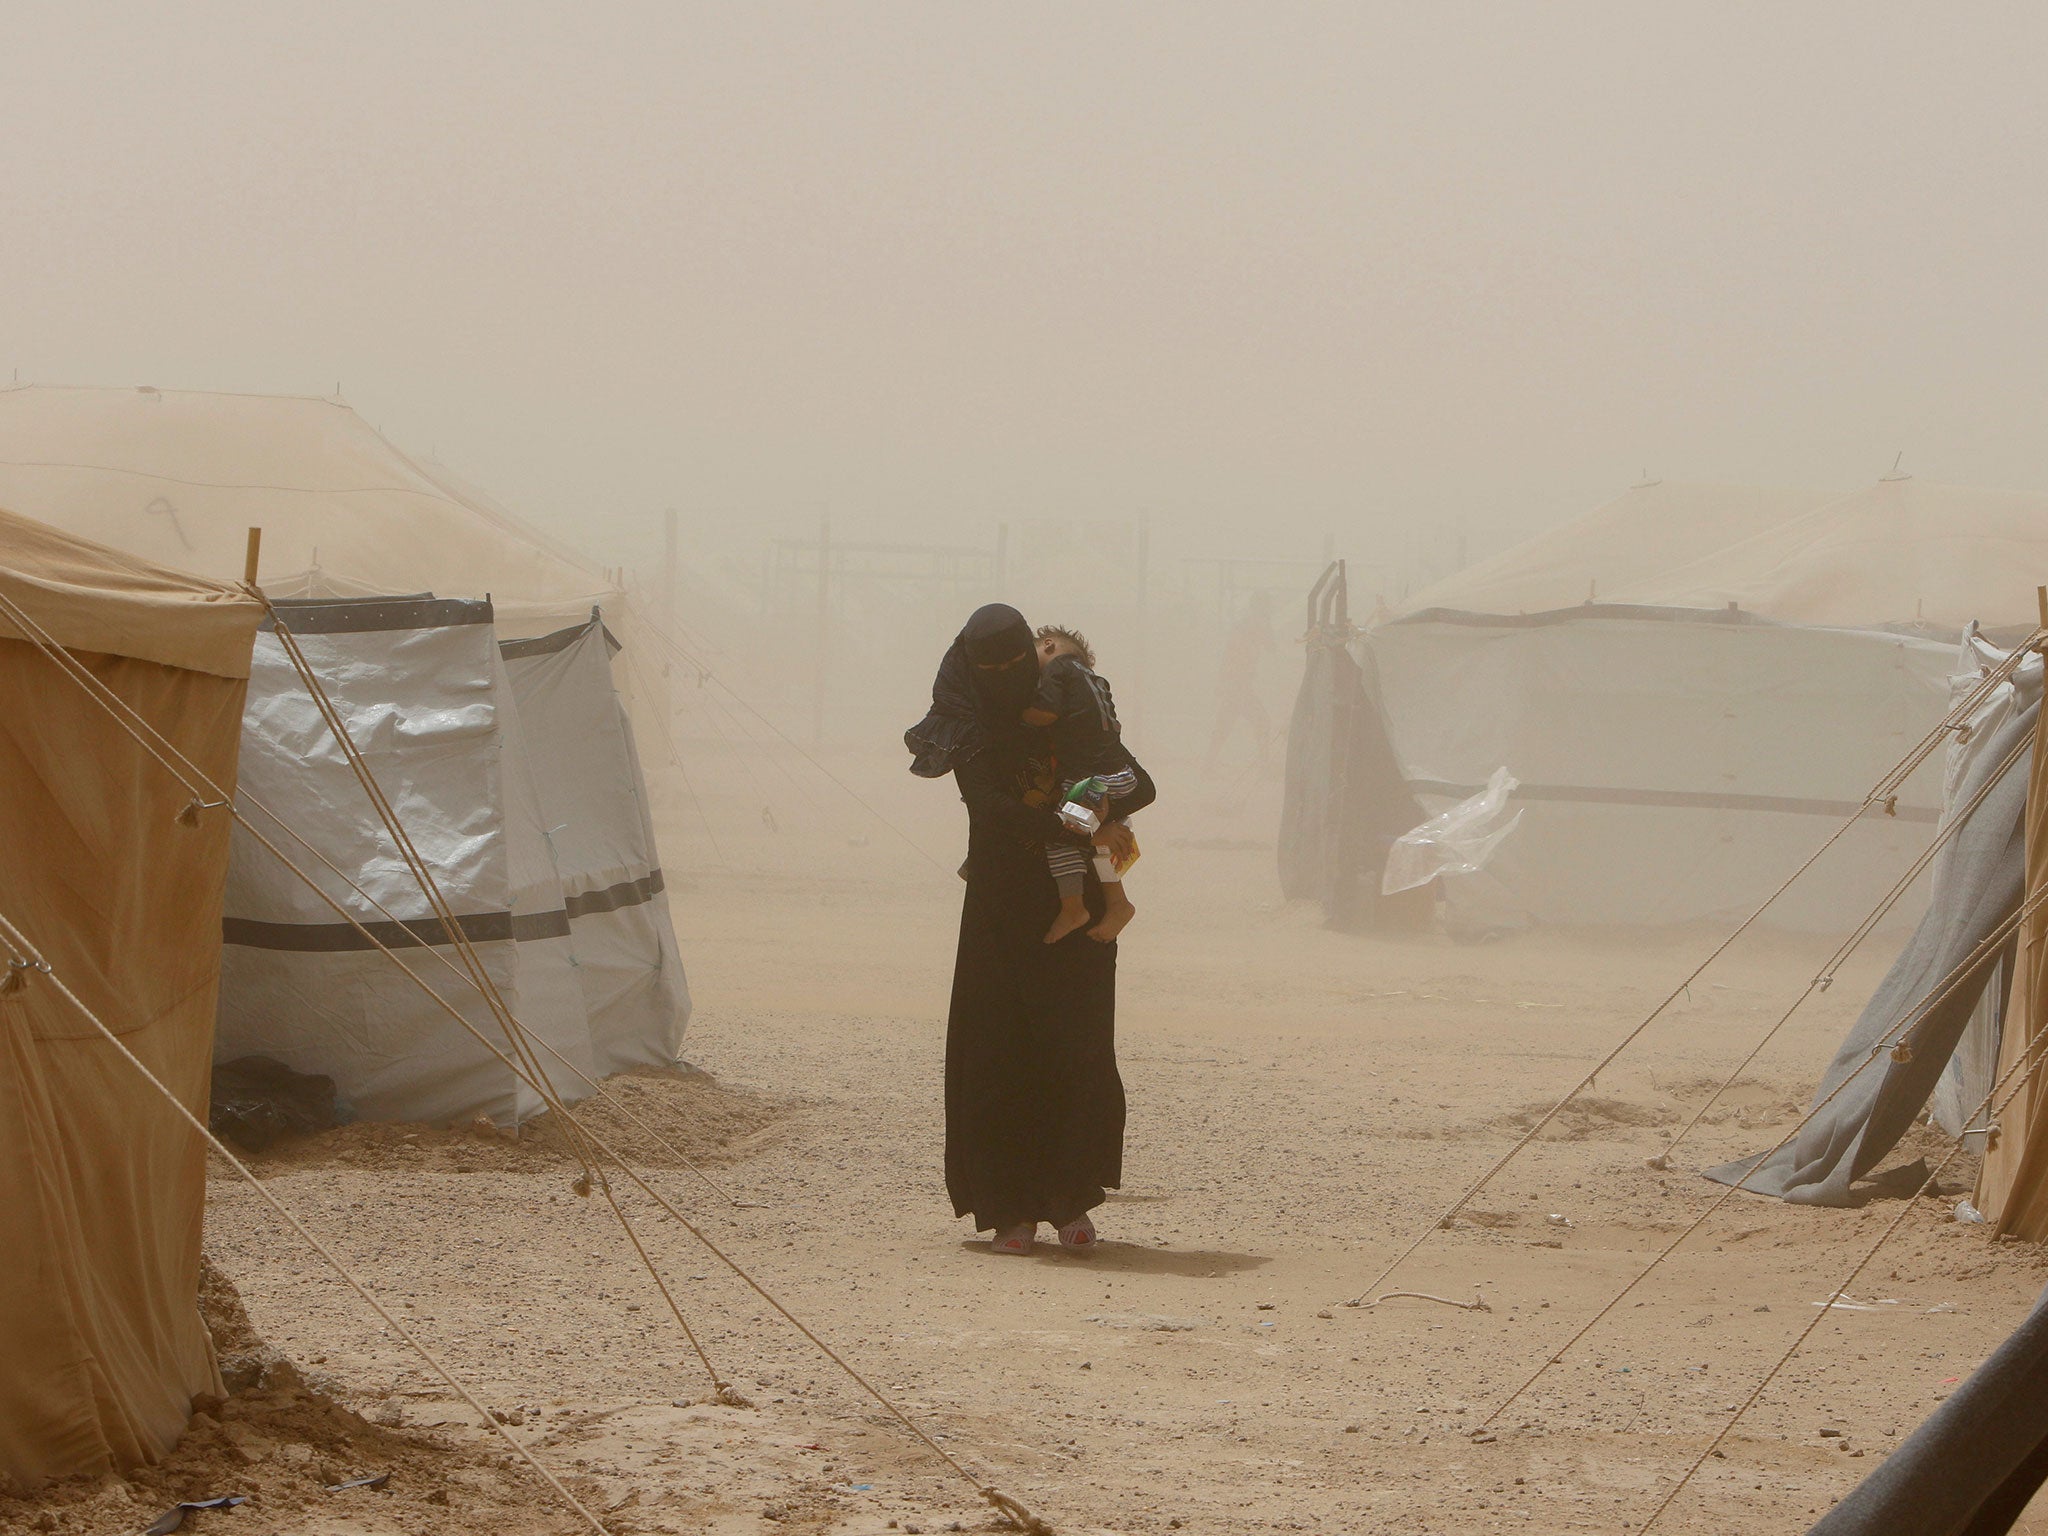 A woman, who fled from Fallujah carries her child during a dust storm at a refugee camp in Amiriyat al Fallujah in Iraq on June 16, 2016